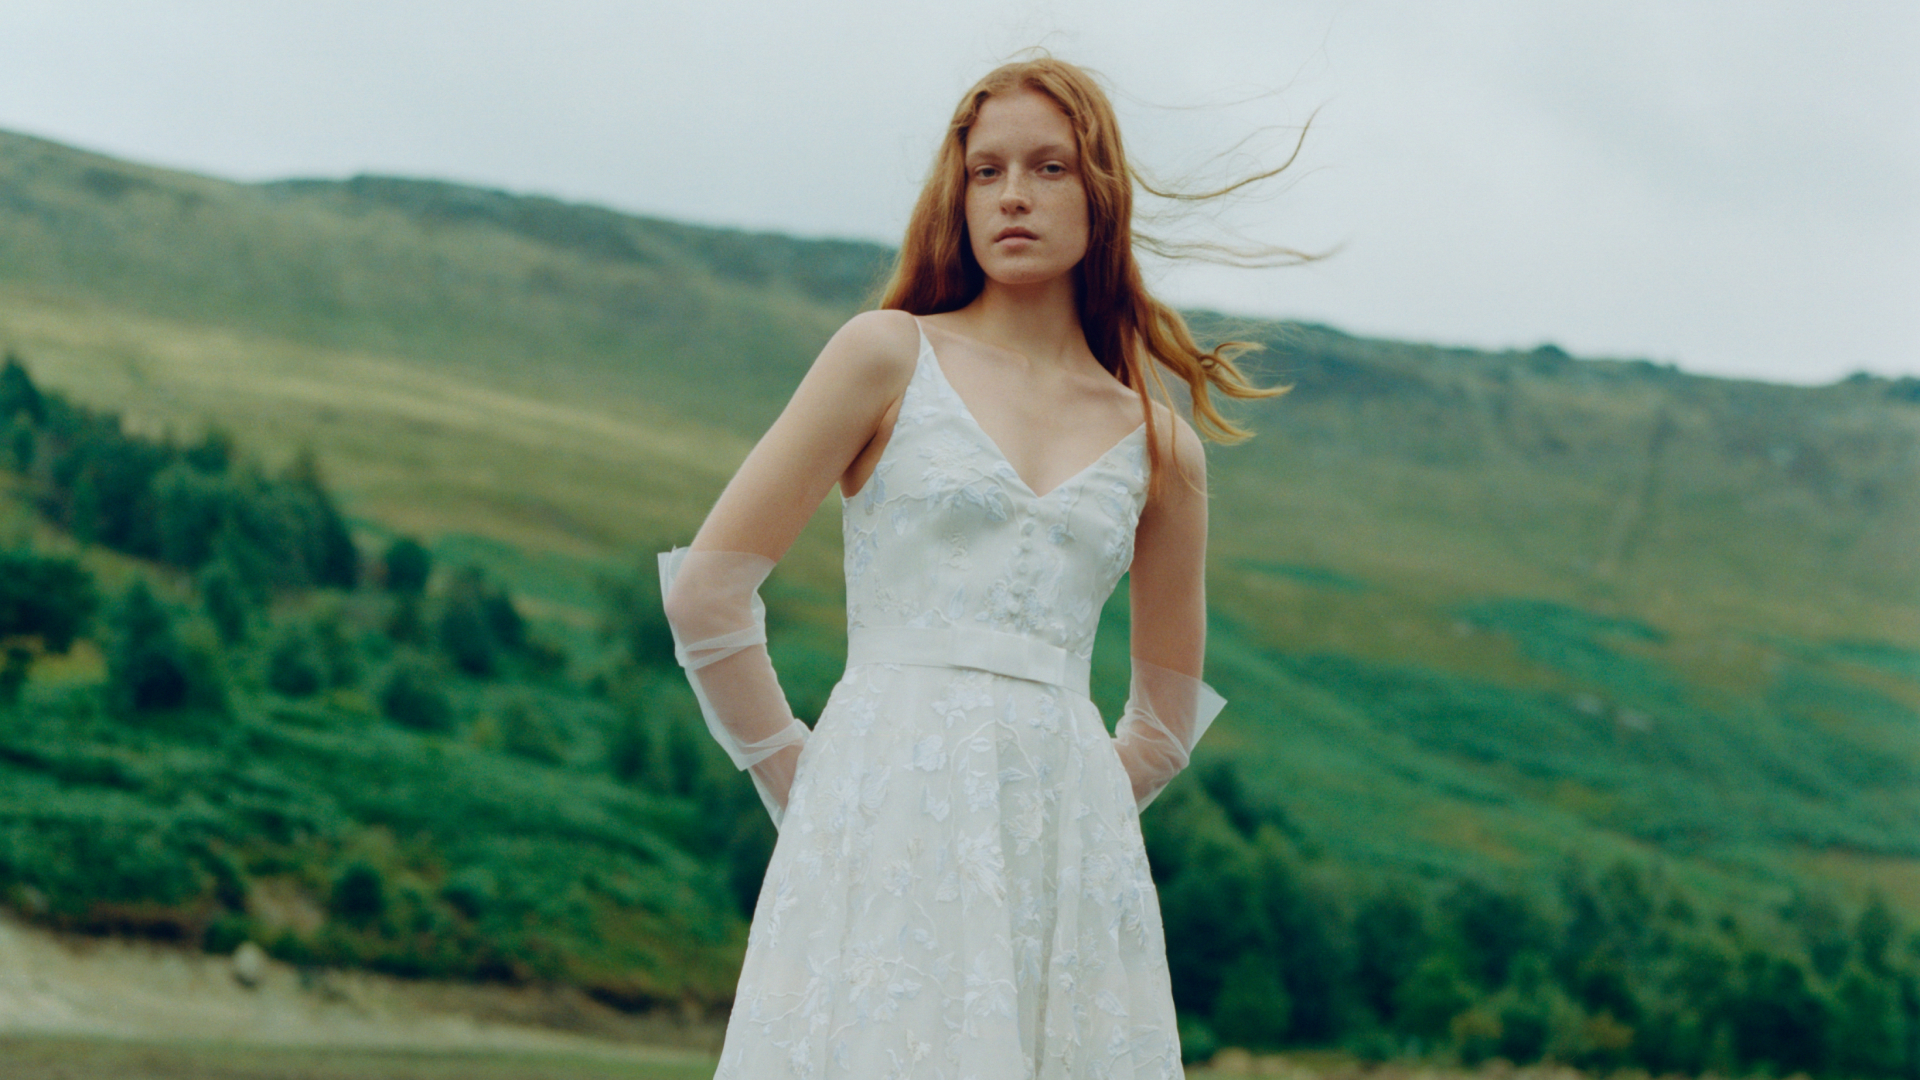 The Biggest Wedding Dress Trends of 2023, According to Bridal Experts